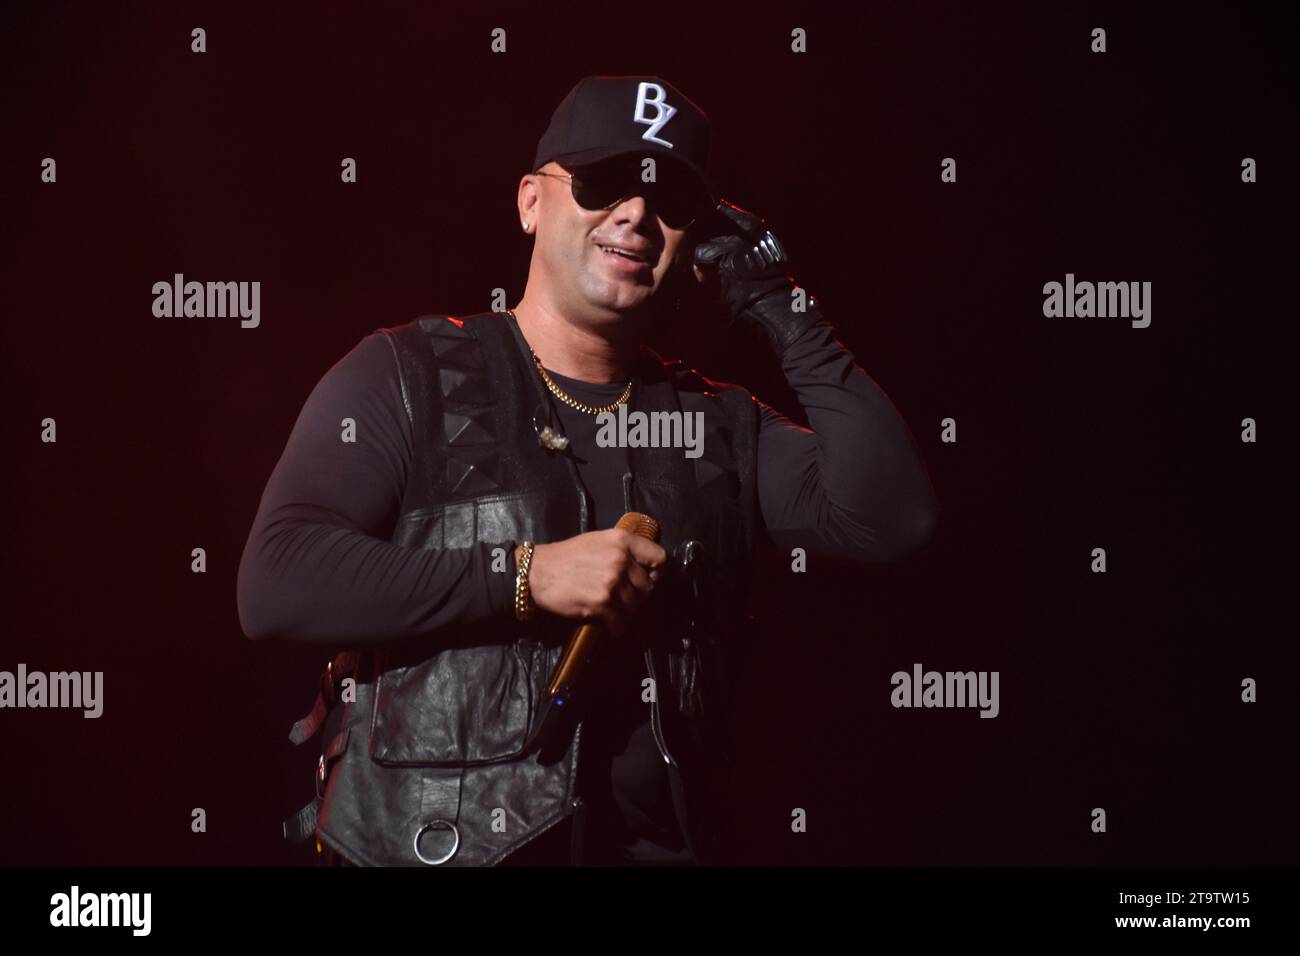 November 25, 2023, Mexico City, Mexico: Juan Luis Morera known as Wisin member of the Puerto Rican Reggaeton Duo Wisin & Yandel,  performs on stage as part of the   'Coca Cola Flow Fest 2023' Reggaeton music Festival at Autodromo Hermanos Rodriguez. on November 25, 2023 in Mexico City, Mexico. (Photo by Essene Hernandez/ Eyepix/Sipa USA) Stock Photo